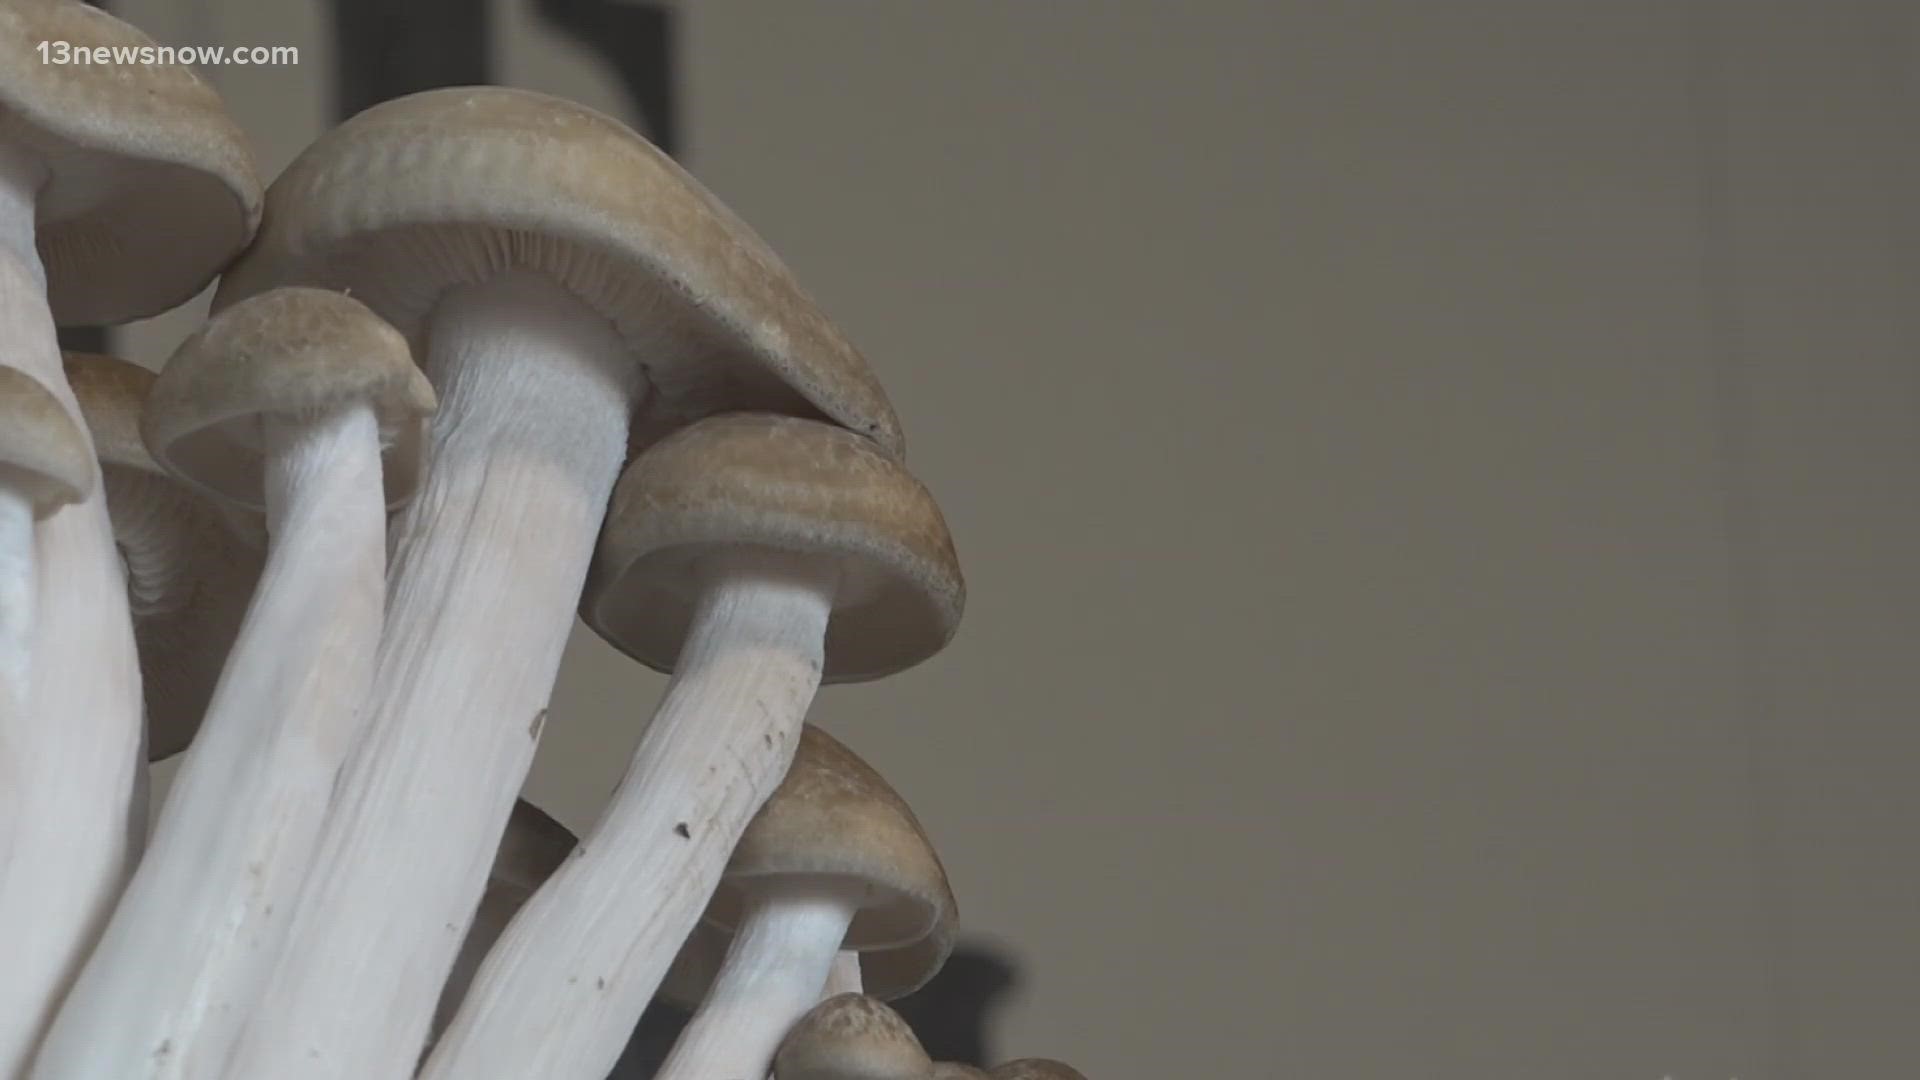 A psychedelic drug is once again at the center of discussion among Virginia lawmakers.